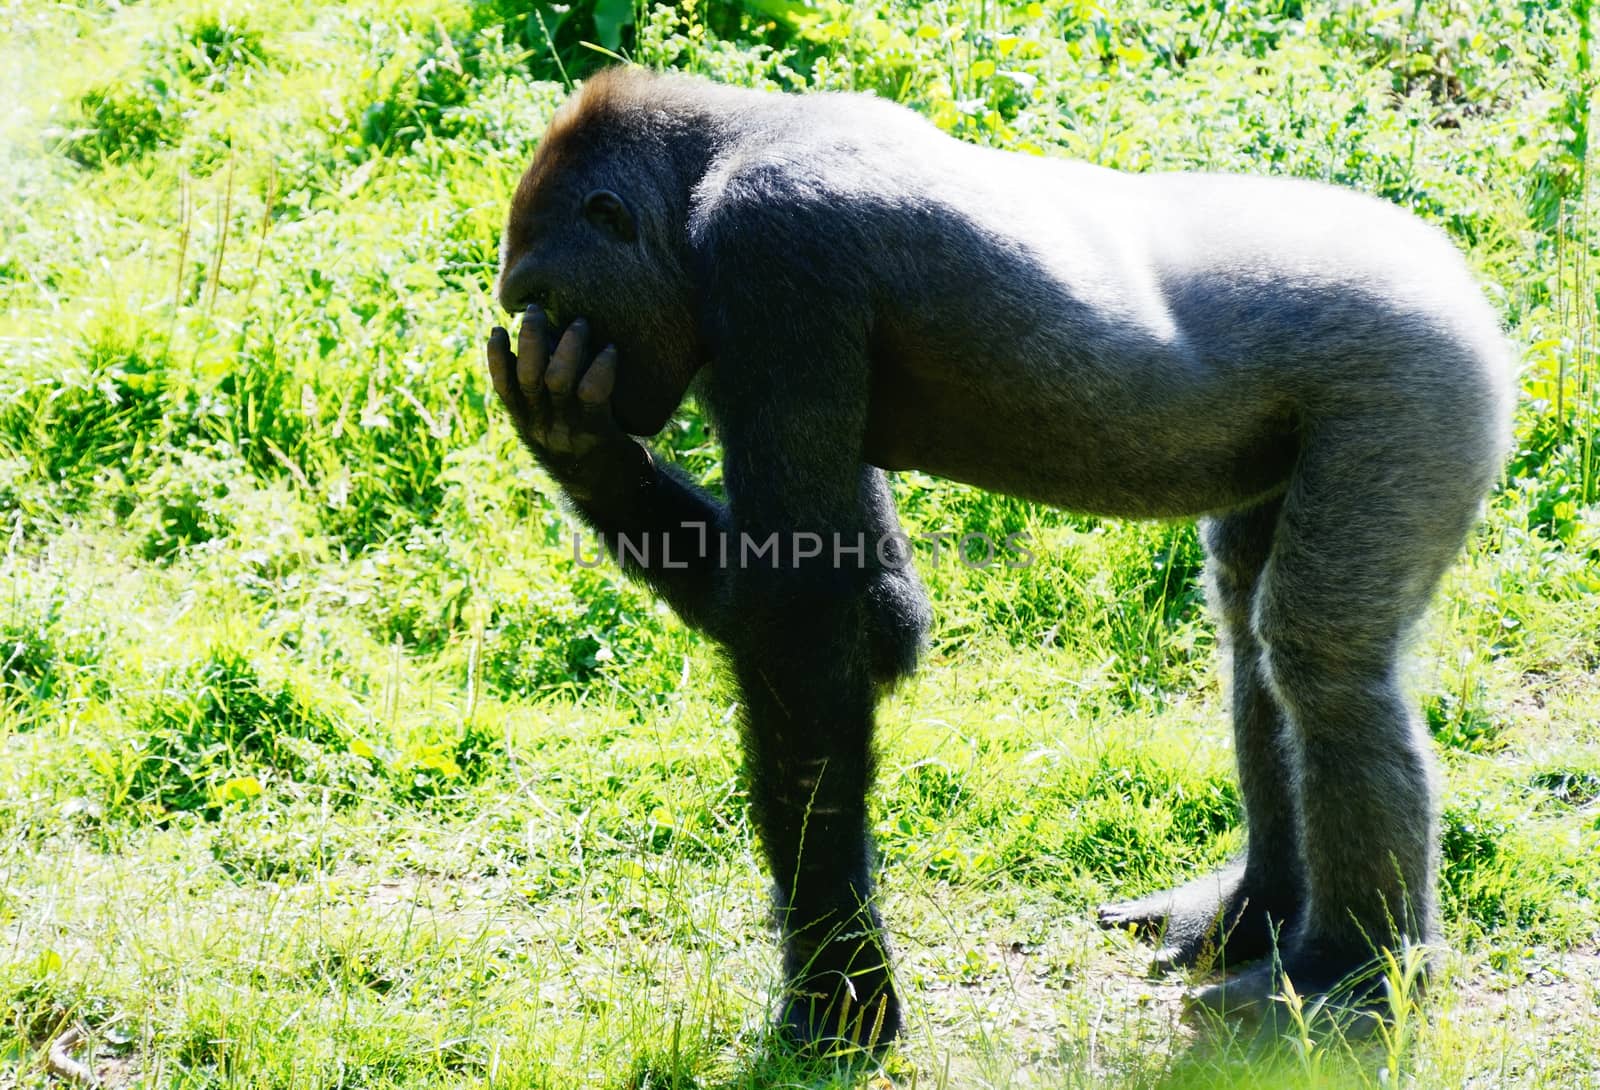 A lone young male gorilla eating on a sunny day